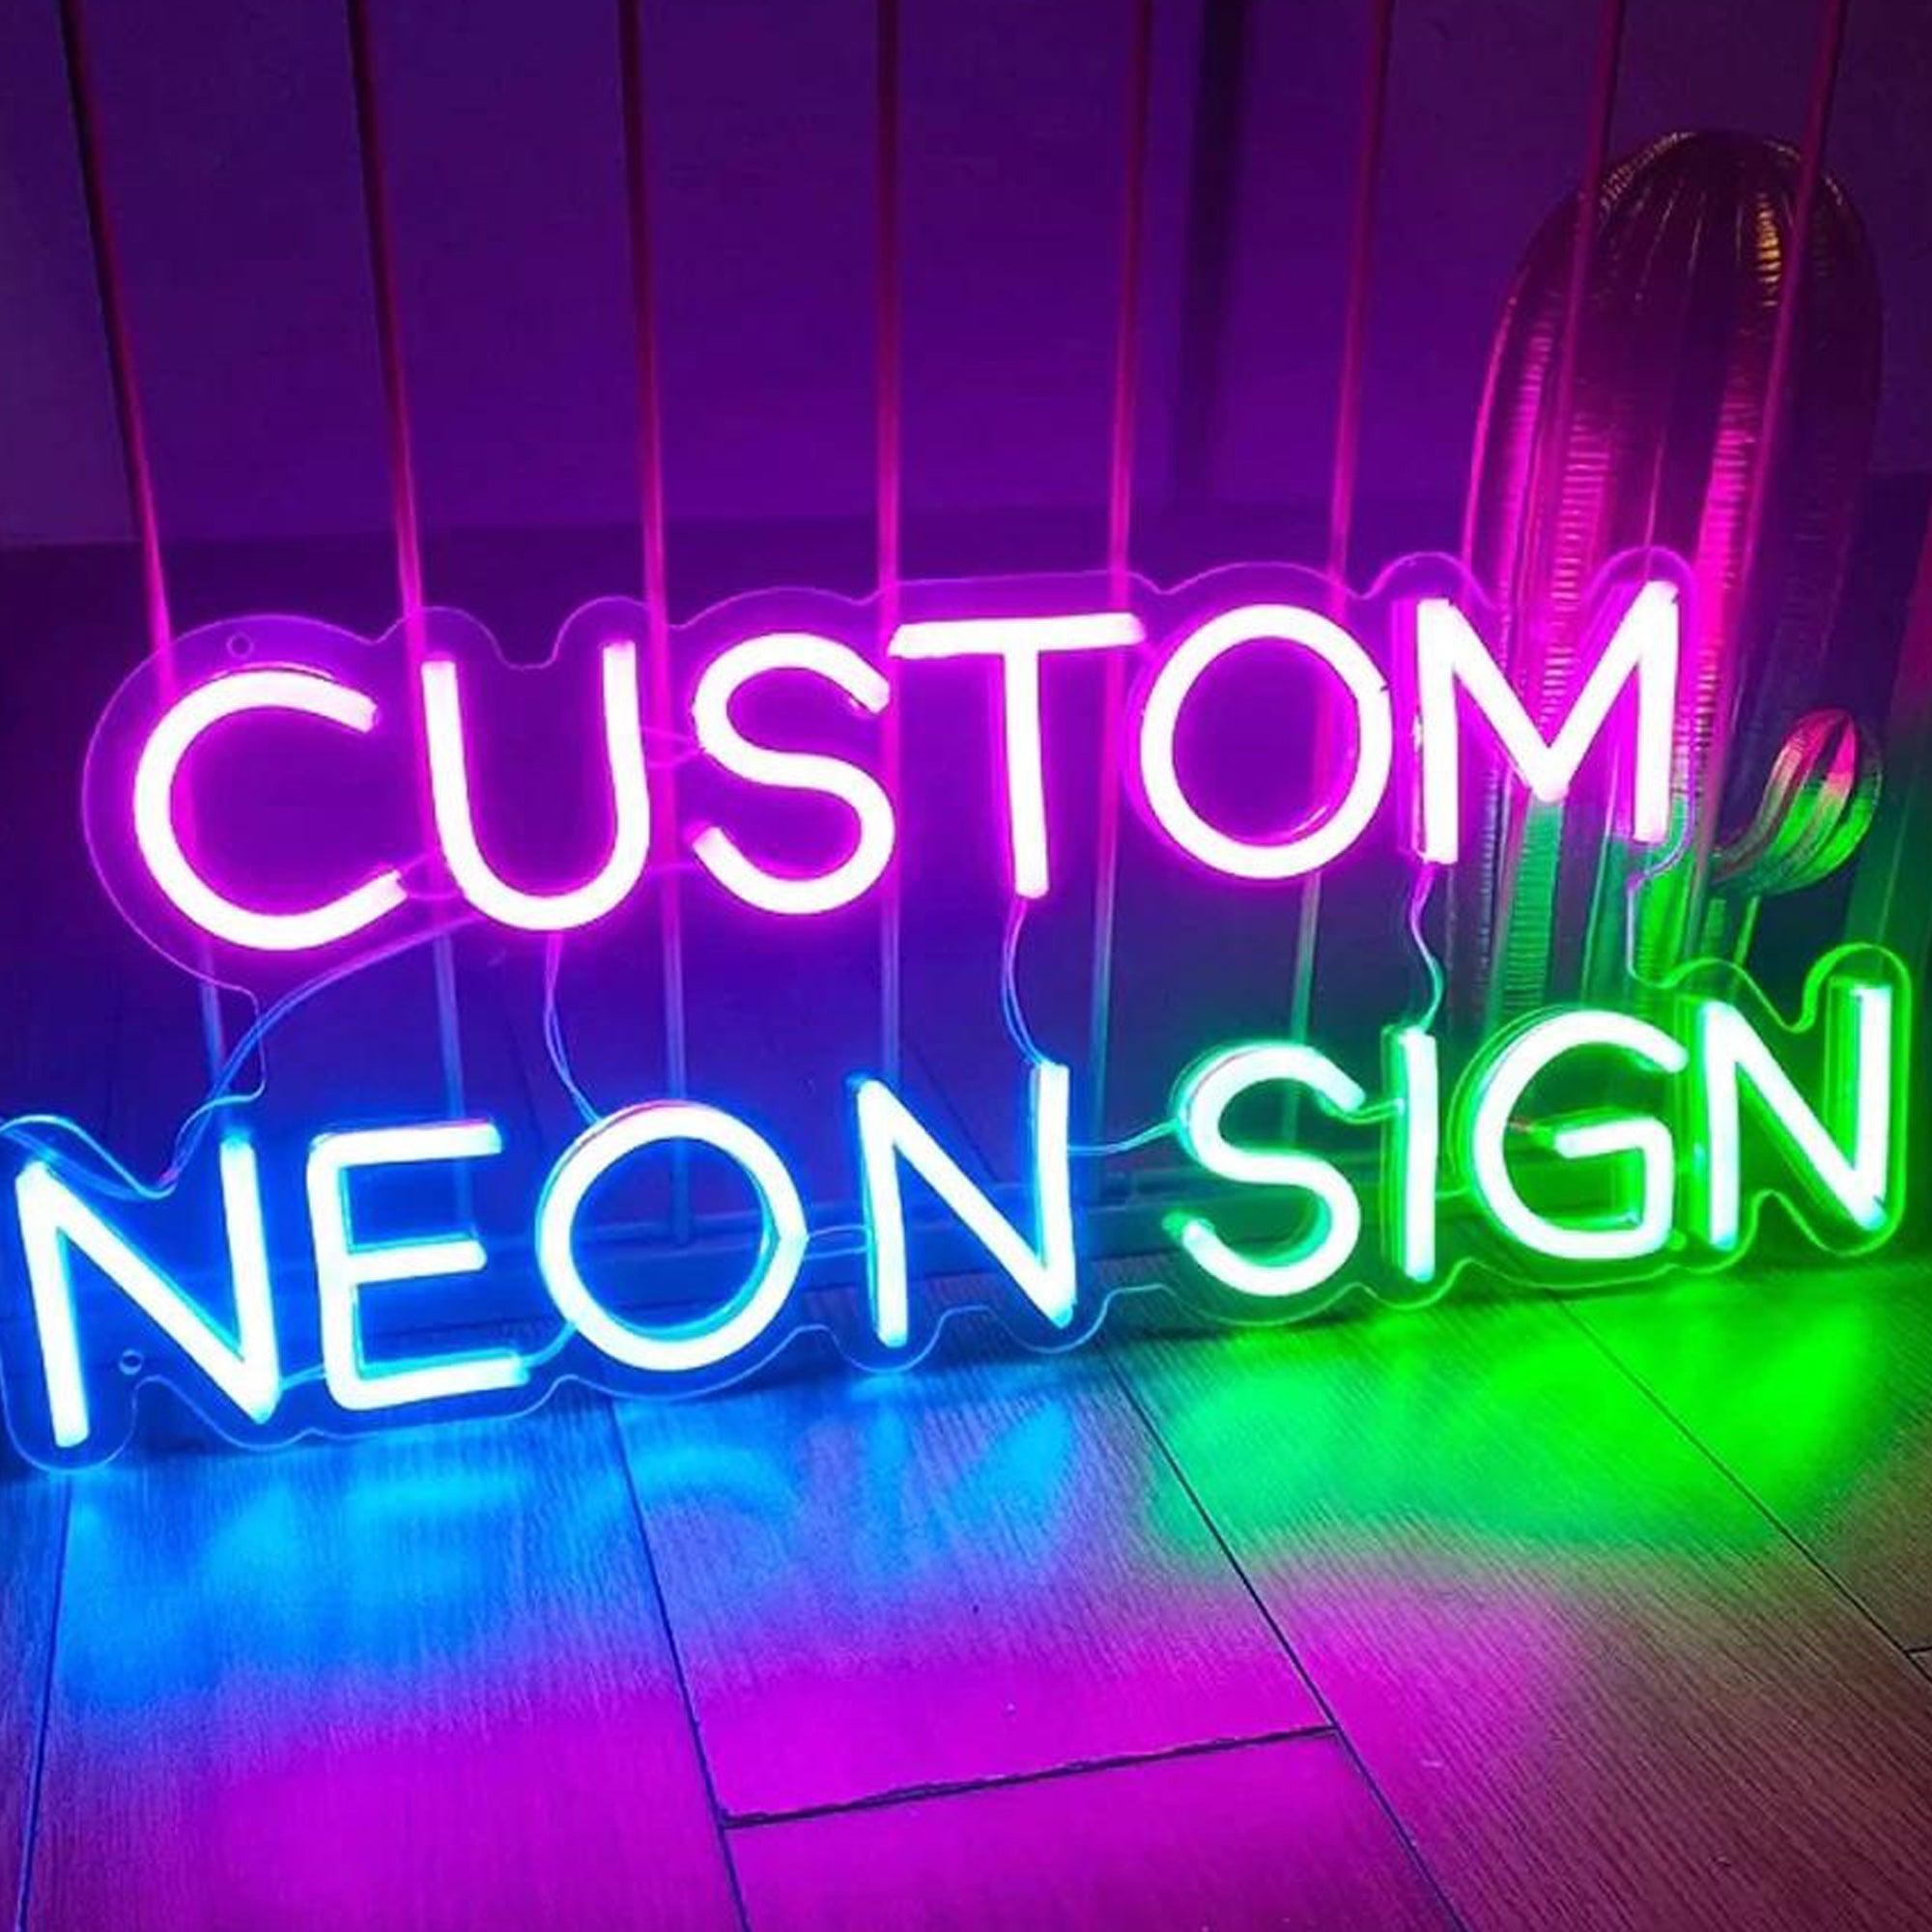 Custom Neon Signs,Personalized Large LED Neon Signs for Wall Decor Bedroom Wedding Birthday Party Bachelorette Party Bar Shop Logo Decorations Personalized Name Neon Lights Sign Birthday Gift Hallweem Decor for Women Family Child(Optional 10" to 60") - CustomizeFactory